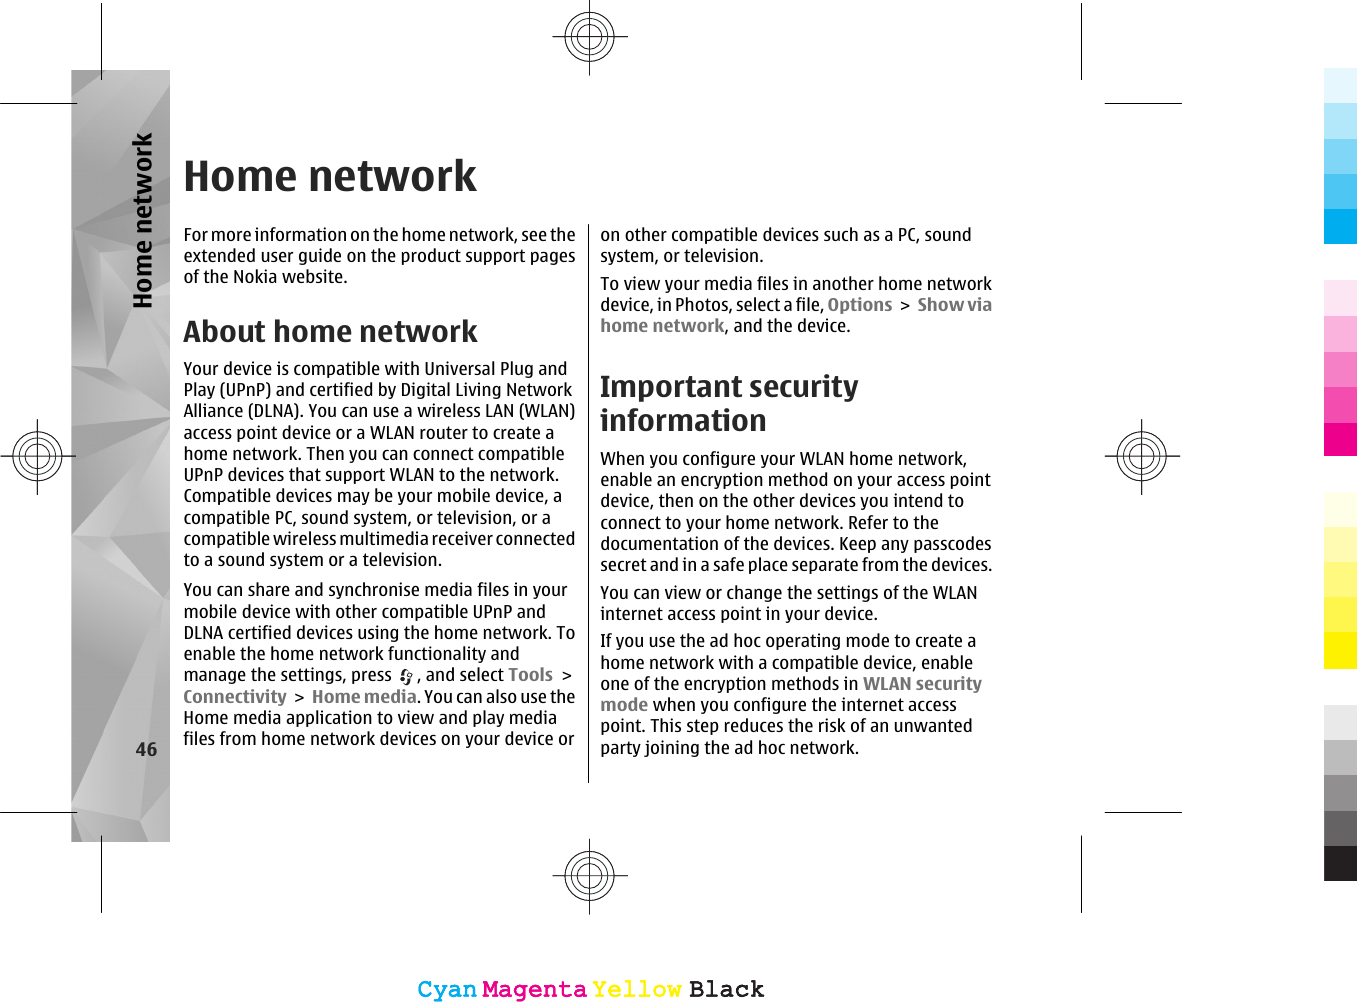 Home networkFor more information on the home network, see theextended user guide on the product support pagesof the Nokia website.About home networkYour device is compatible with Universal Plug andPlay (UPnP) and certified by Digital Living NetworkAlliance (DLNA). You can use a wireless LAN (WLAN)access point device or a WLAN router to create ahome network. Then you can connect compatibleUPnP devices that support WLAN to the network.Compatible devices may be your mobile device, acompatible PC, sound system, or television, or acompatible wireless multimedia receiver connectedto a sound system or a television.You can share and synchronise media files in yourmobile device with other compatible UPnP andDLNA certified devices using the home network. Toenable the home network functionality andmanage the settings, press  , and select Tools &gt;Connectivity &gt; Home media. You can also use theHome media application to view and play mediafiles from home network devices on your device oron other compatible devices such as a PC, soundsystem, or television.To view your media files in another home networkdevice, in Photos, select a file, Options &gt; Show viahome network, and the device.Important securityinformationWhen you configure your WLAN home network,enable an encryption method on your access pointdevice, then on the other devices you intend toconnect to your home network. Refer to thedocumentation of the devices. Keep any passcodessecret and in a safe place separate from the devices.You can view or change the settings of the WLANinternet access point in your device.If you use the ad hoc operating mode to create ahome network with a compatible device, enableone of the encryption methods in WLAN securitymode when you configure the internet accesspoint. This step reduces the risk of an unwantedparty joining the ad hoc network.46Home networkCyanCyanMagentaMagentaYellowYellowBlackBlackCyanCyanMagentaMagentaYellowYellowBlackBlack